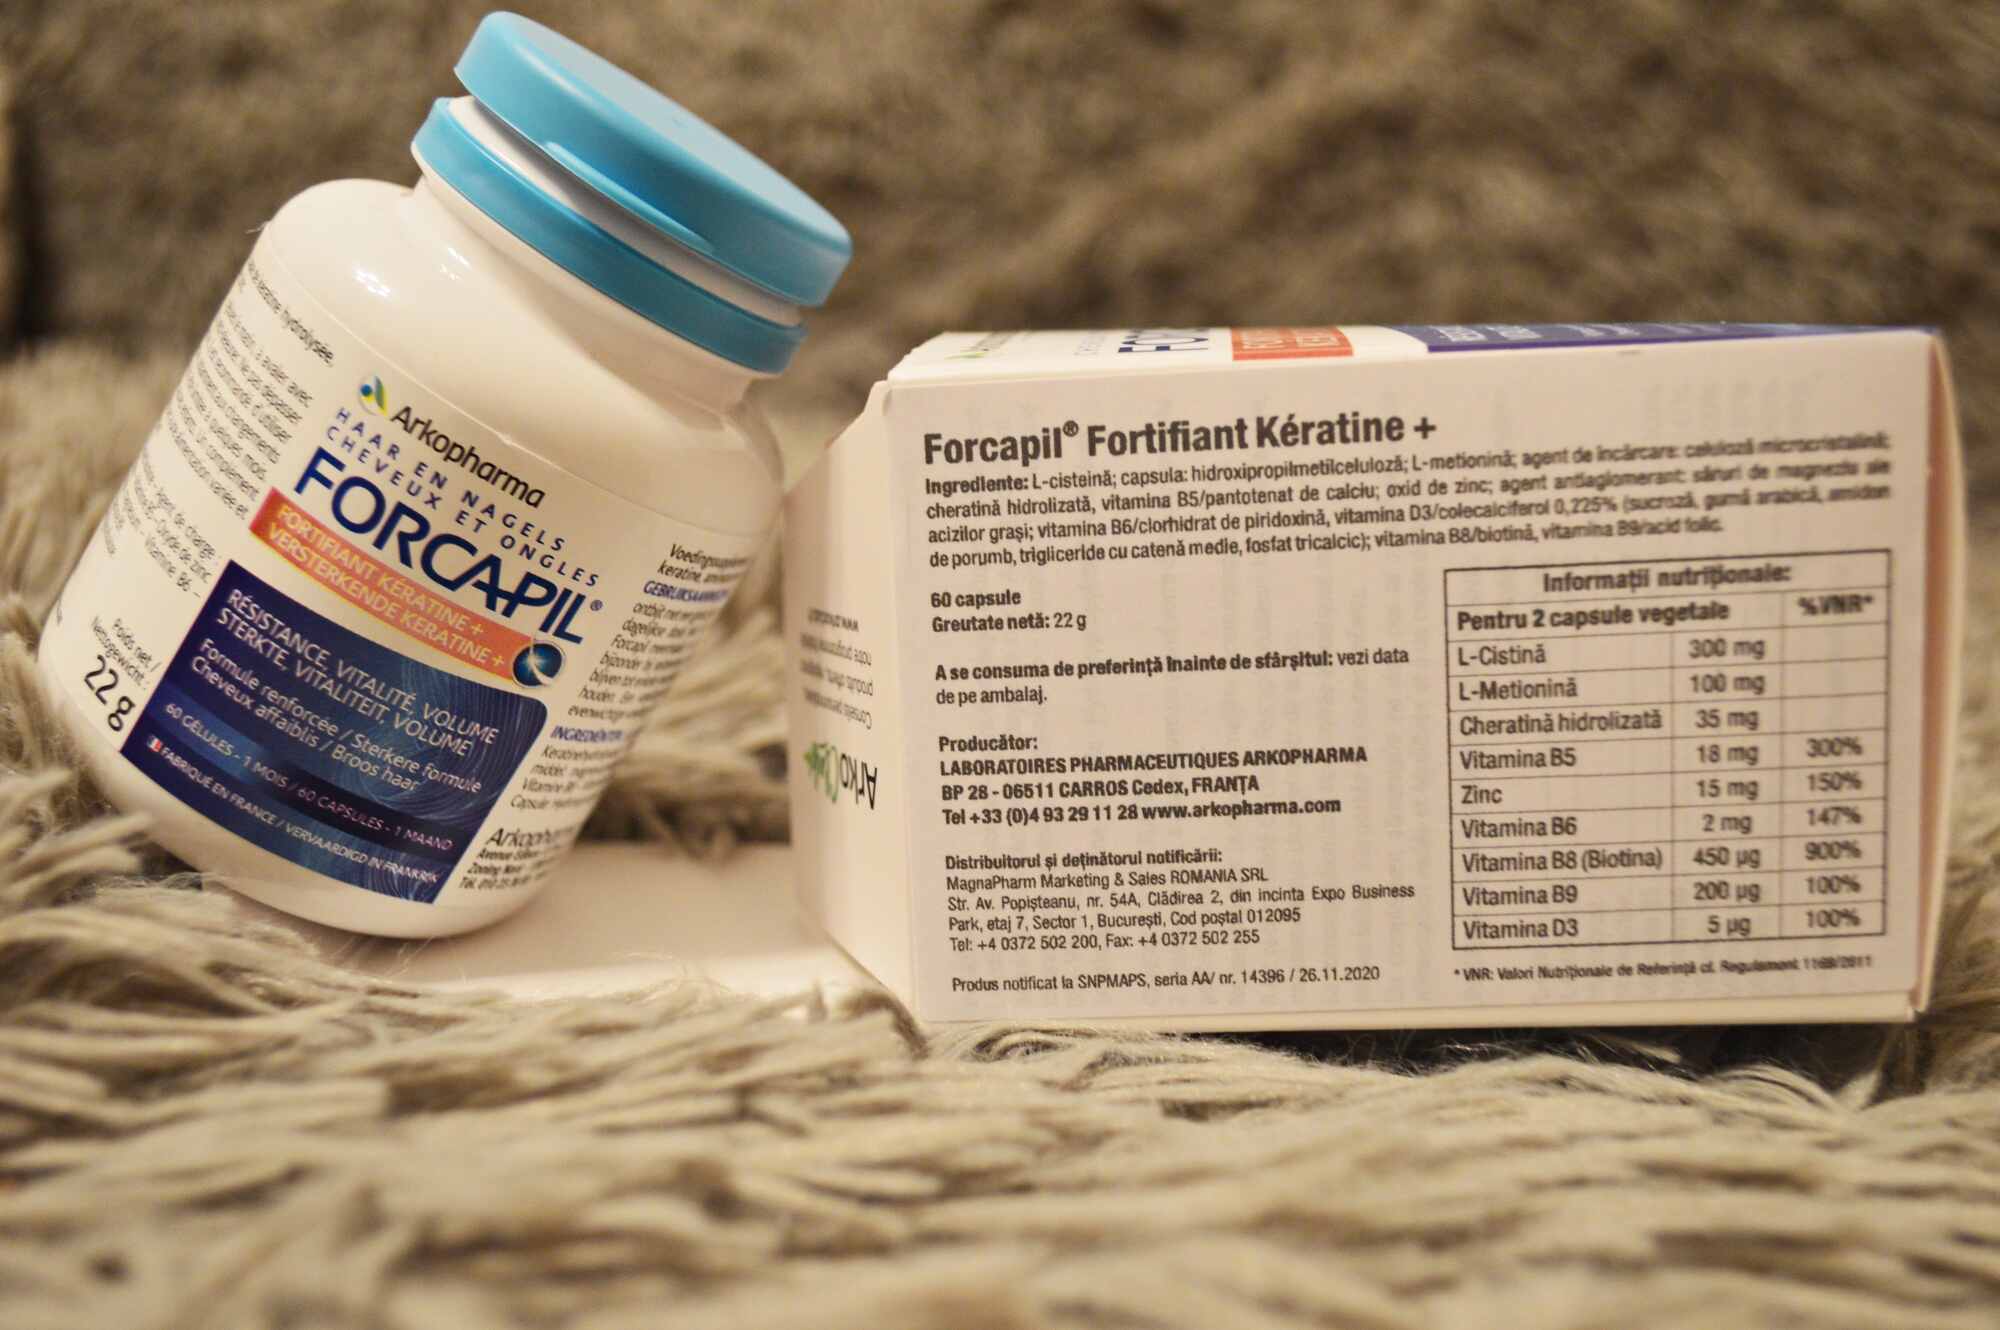 forcapil fortifiant keratine review